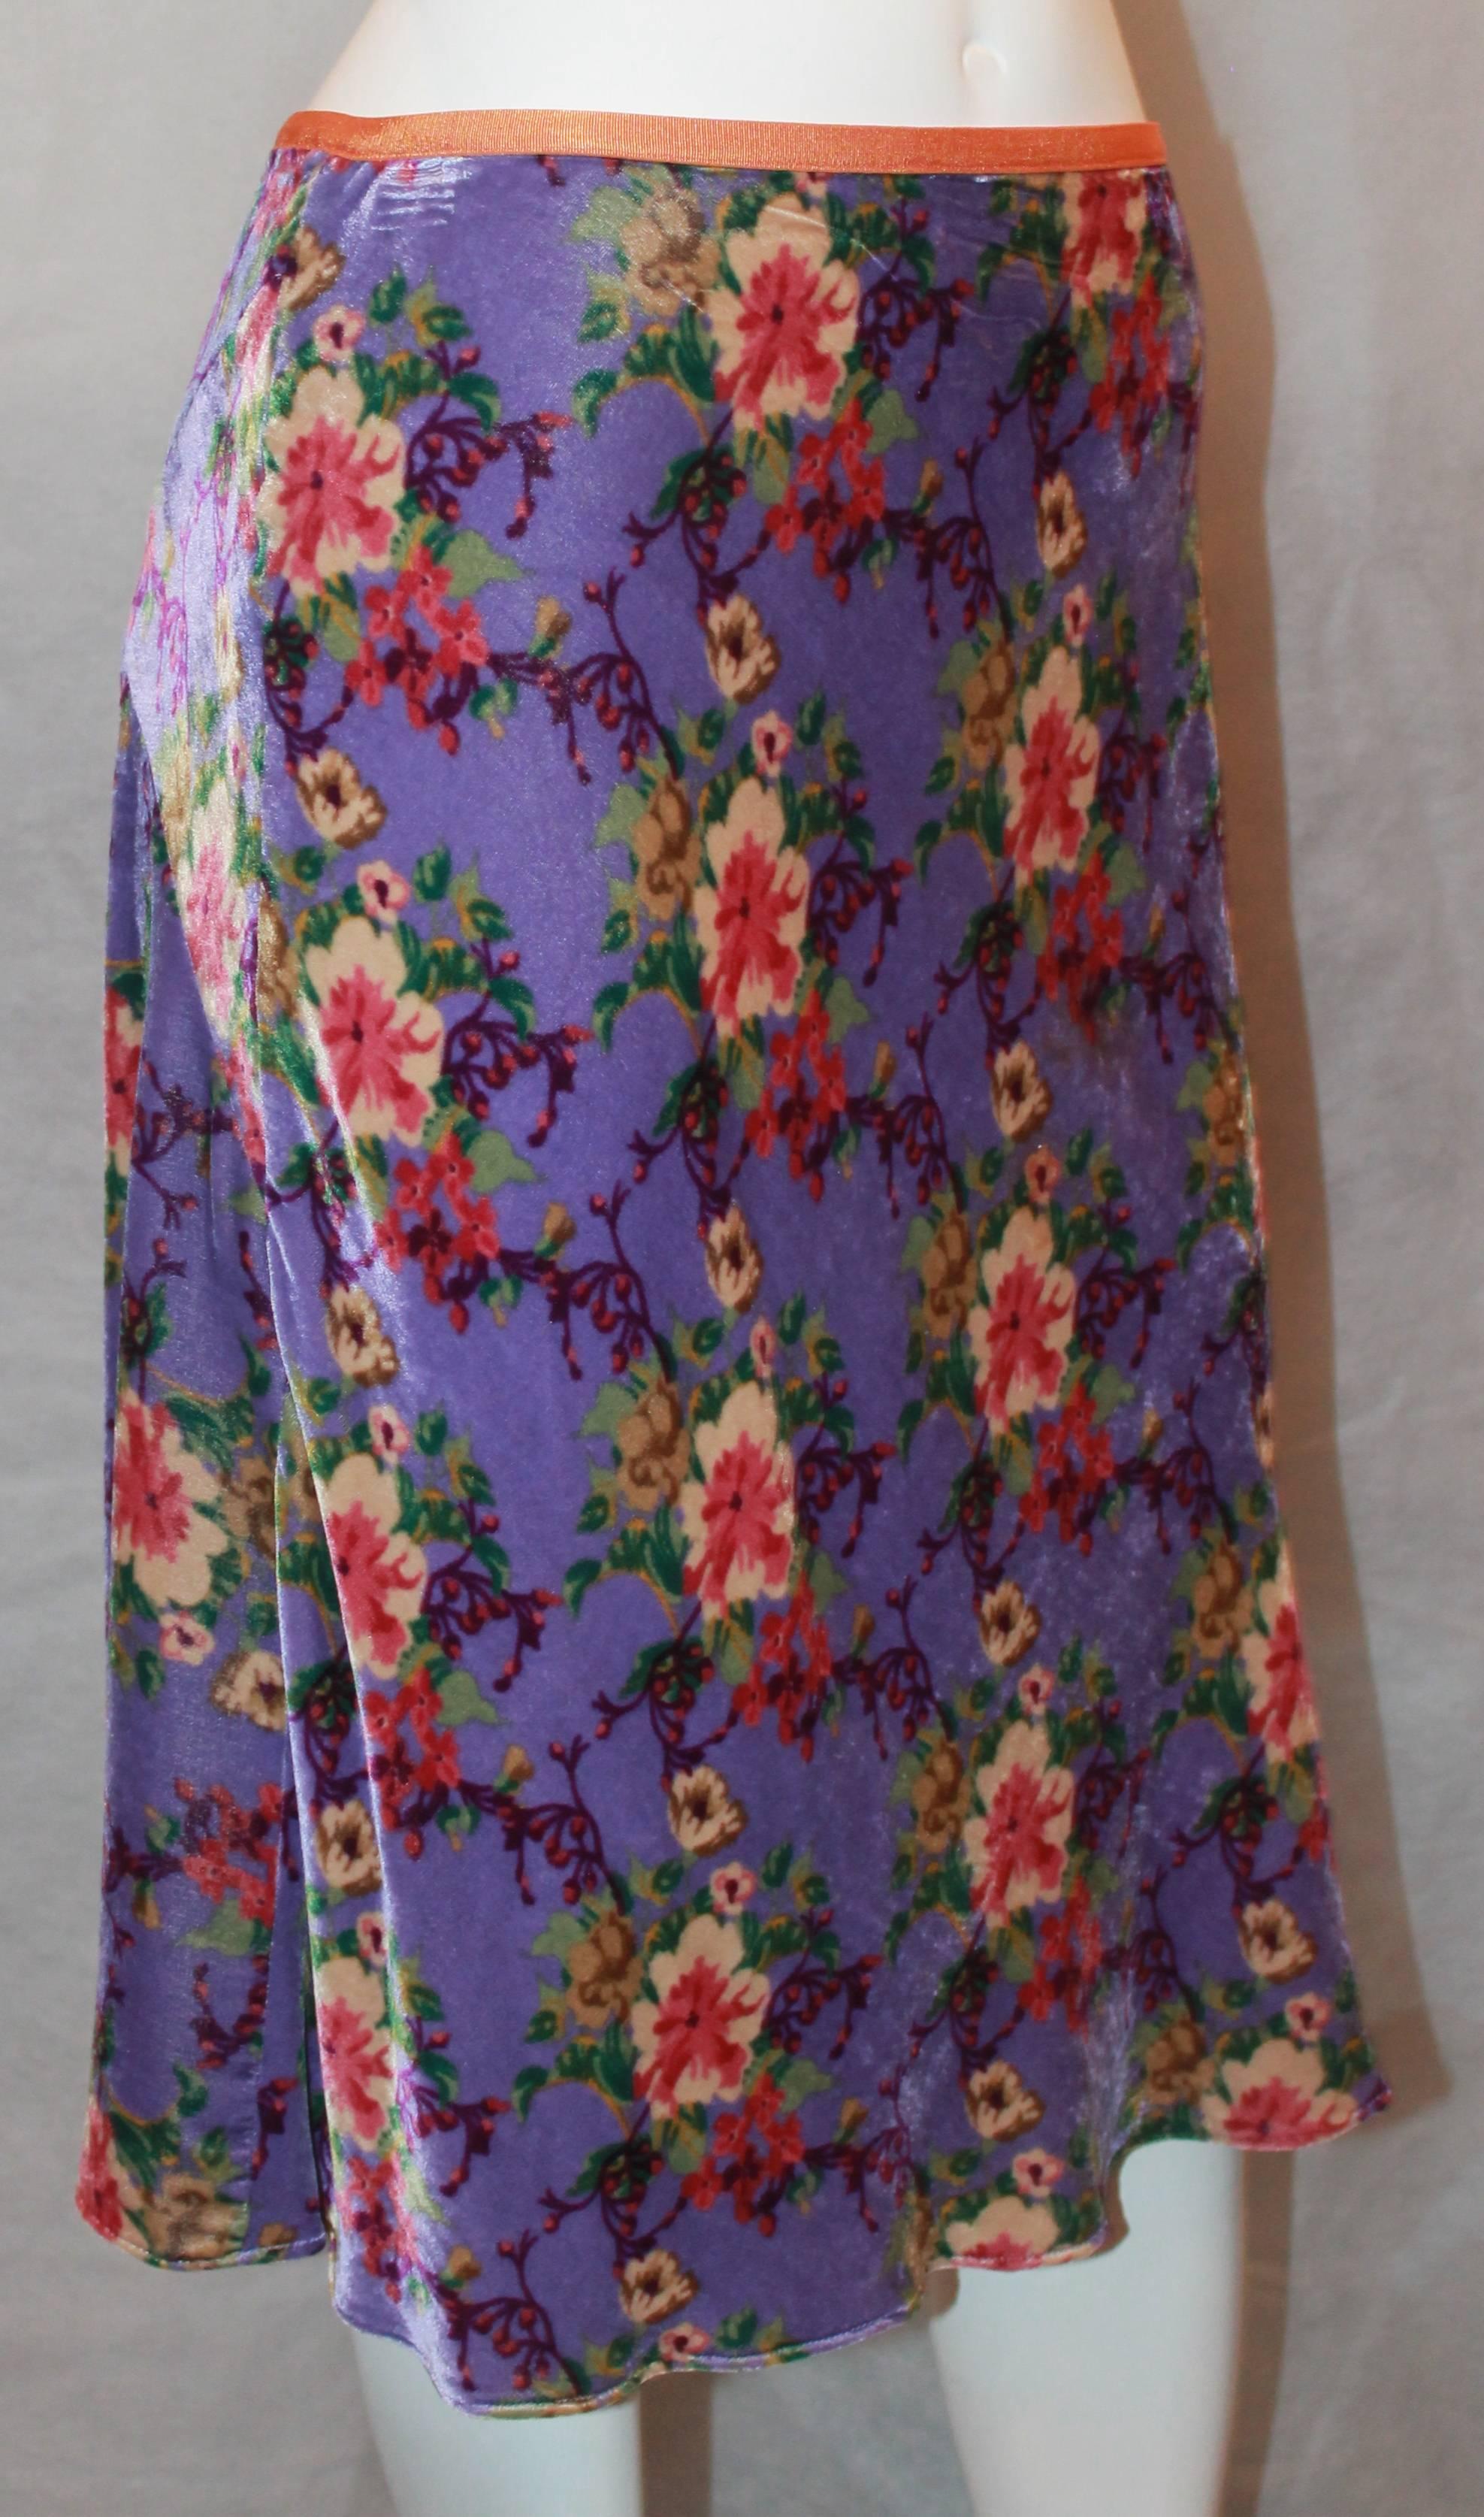 Etro Purple Velvet A-Line Skirt w/ Subtle Fish Tail & Floral Pattern - 8/42.  This beautiful skirt is in excellent condition.  It features a lovely floral pattern, a thin orange waistband, and a subtle fish tail in the back.

Measurements:
Waist: